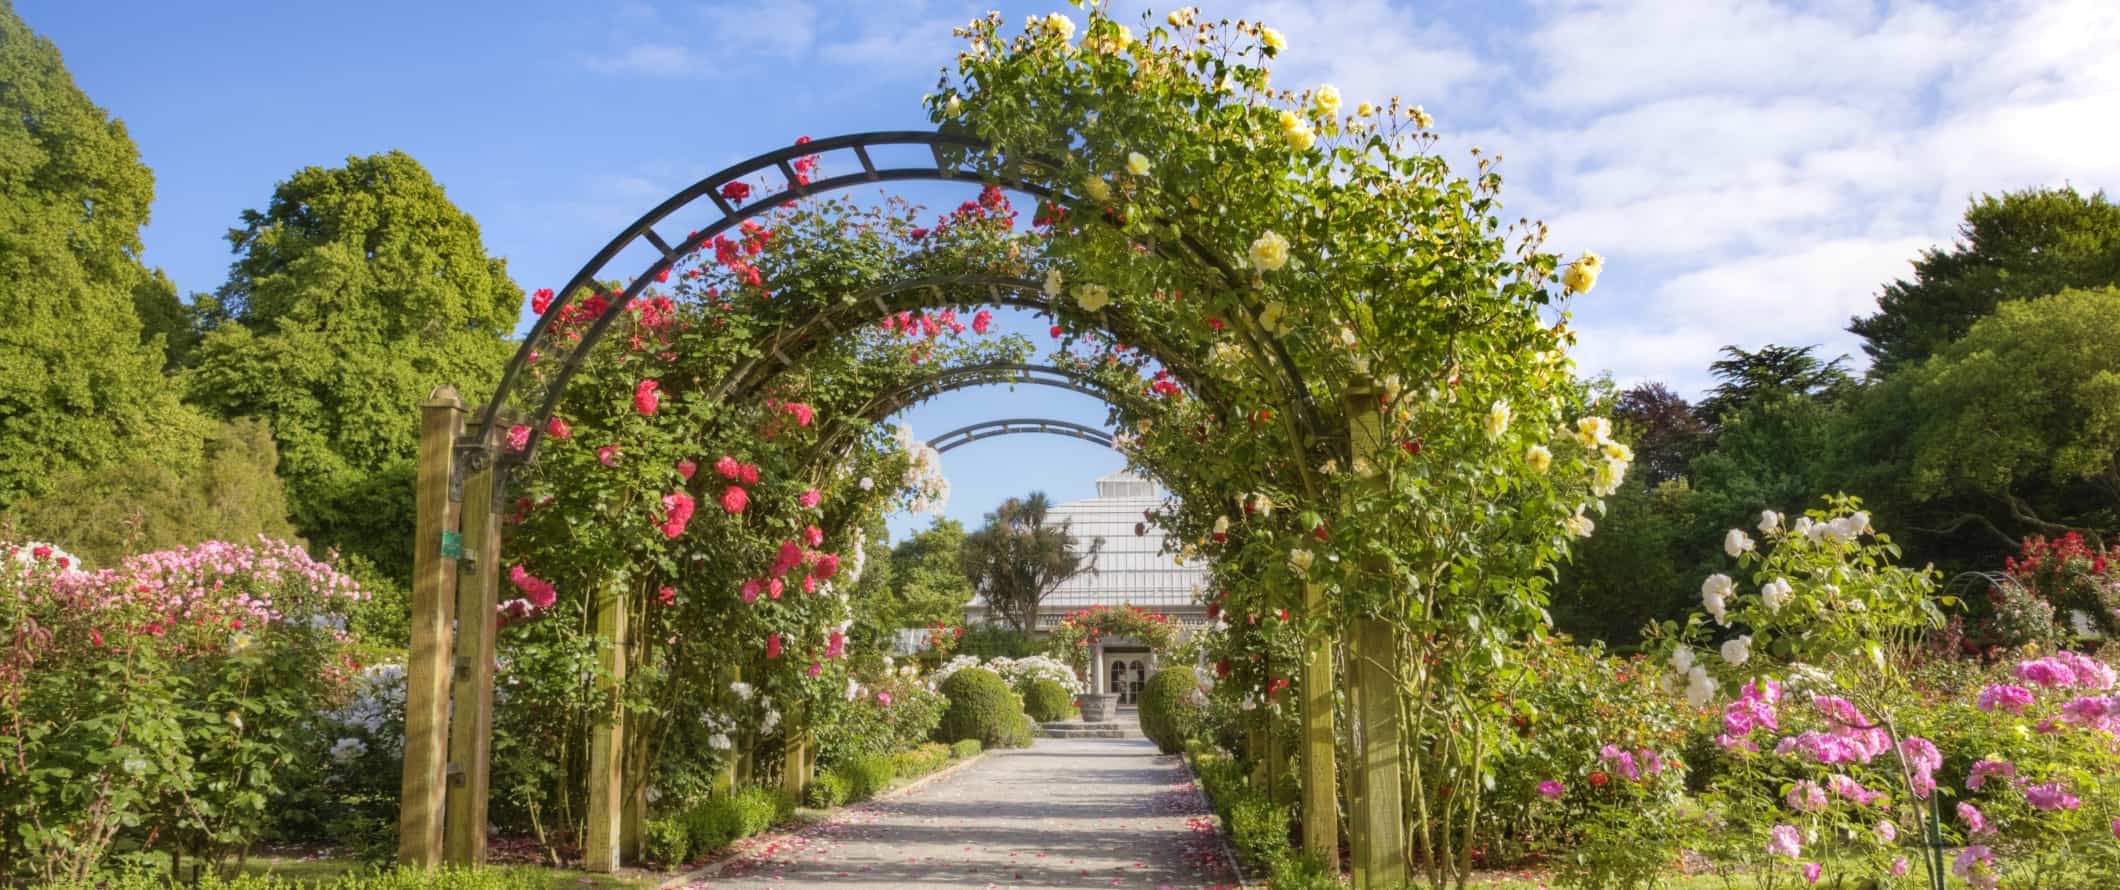 Flower-covered archway at the botanical gardens in Christchurch, New Zealand.